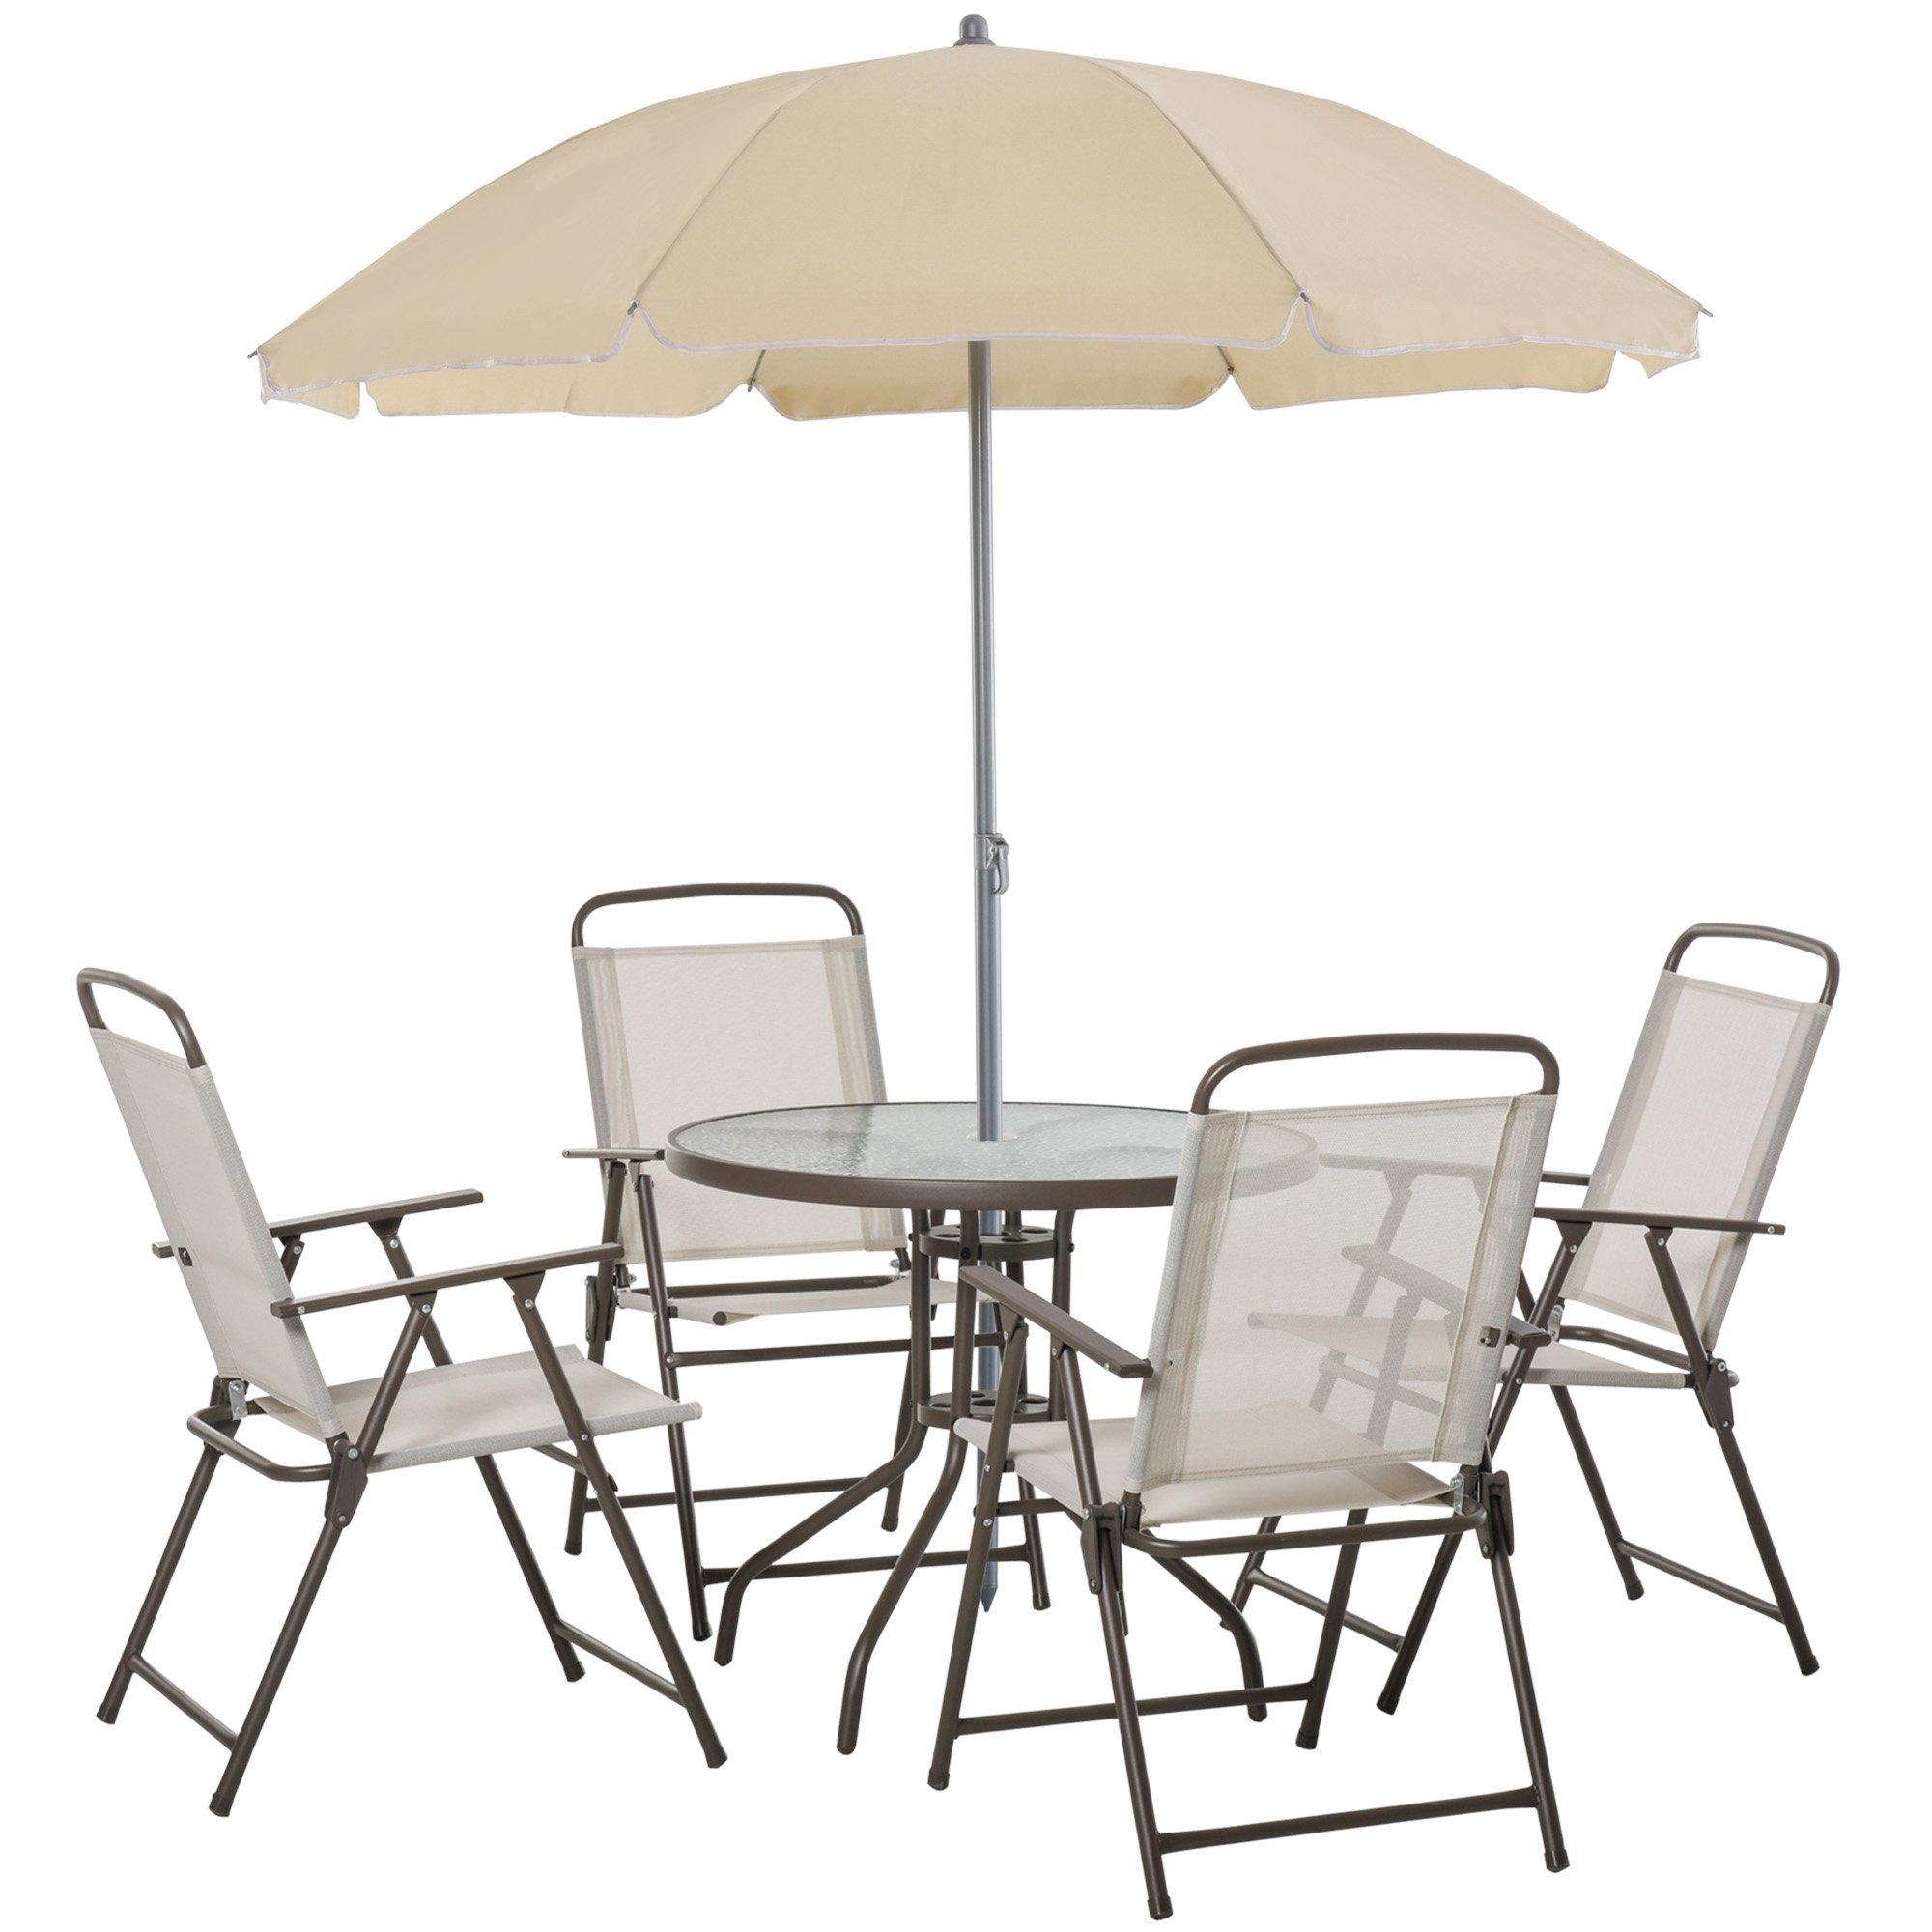 6PC Garden Dining Set Outdoor Furniture Folding Chairs Table Parasol